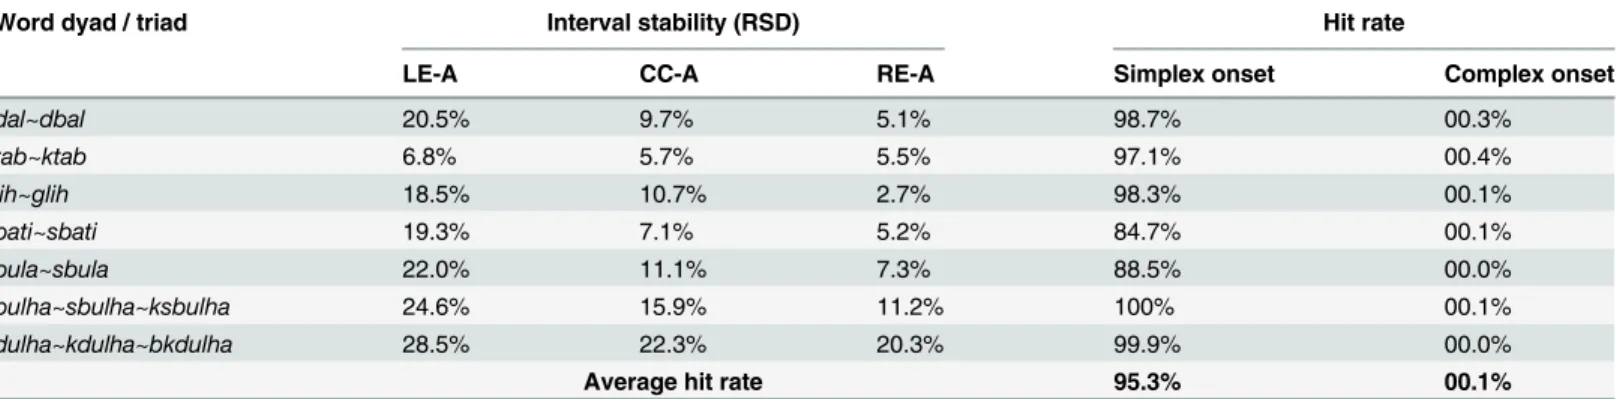 Table 1. The relative standard deviation (RSD) of three intervals, left edge to anchor (LE-A), center to anchor (CC-A), and right edge to anchor (RE-A), for different Moroccan Arabic word sets and model hit rates for each syllabic organization, simplex ons